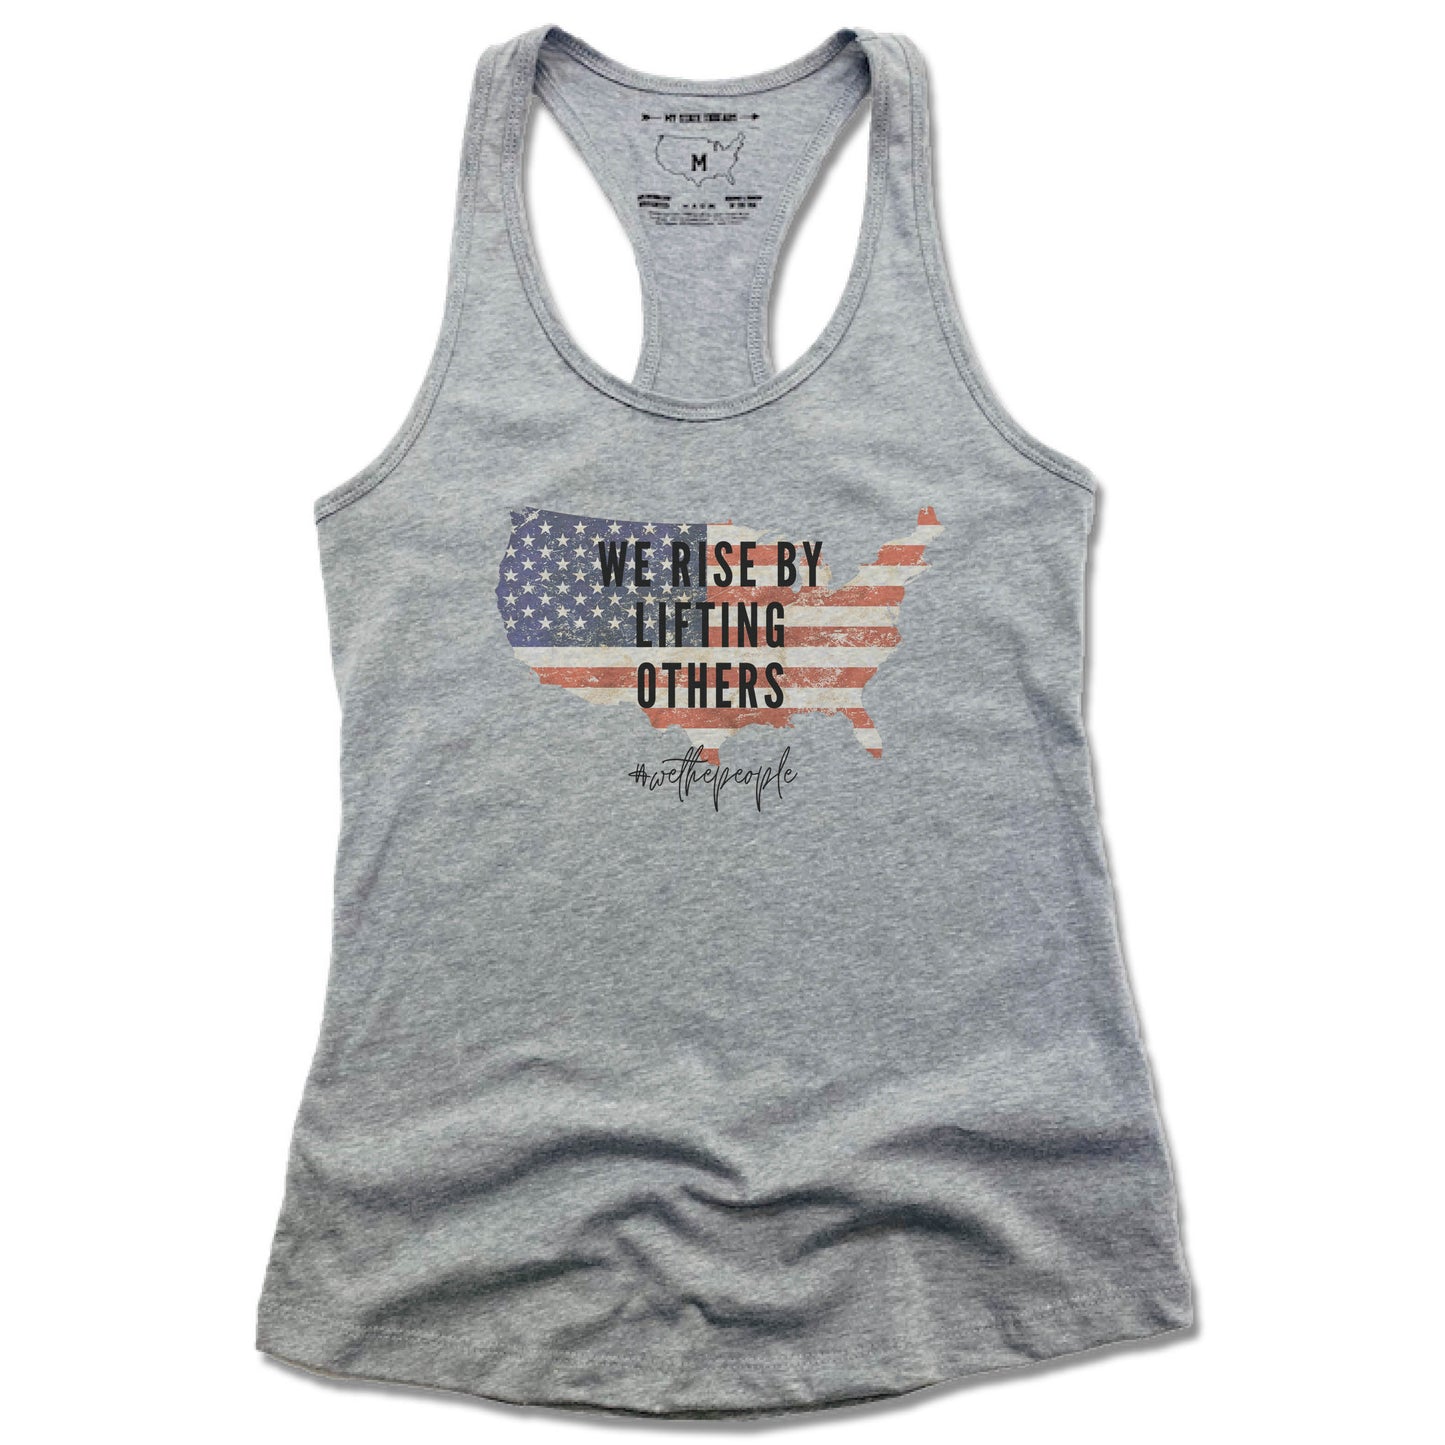 THE SISTER'S CLOSET | LADIES GRAY TANK | LIFTING OTHERS